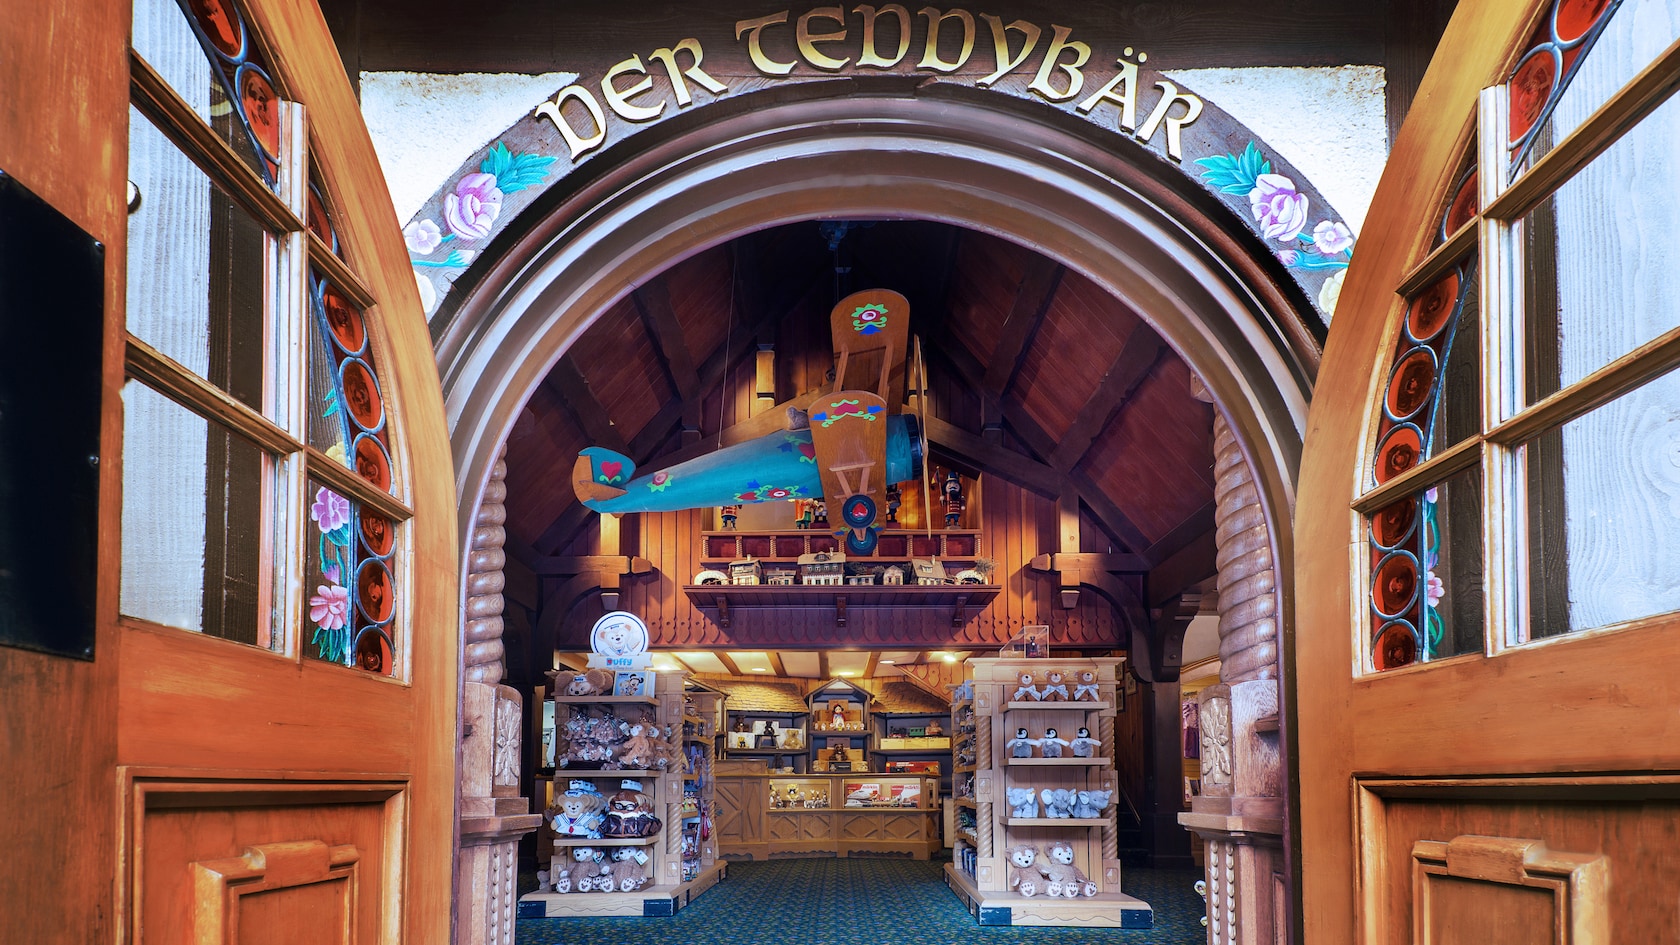 Entrance of Der Teddybär toy shop in the Germany Pavilion at Epcot